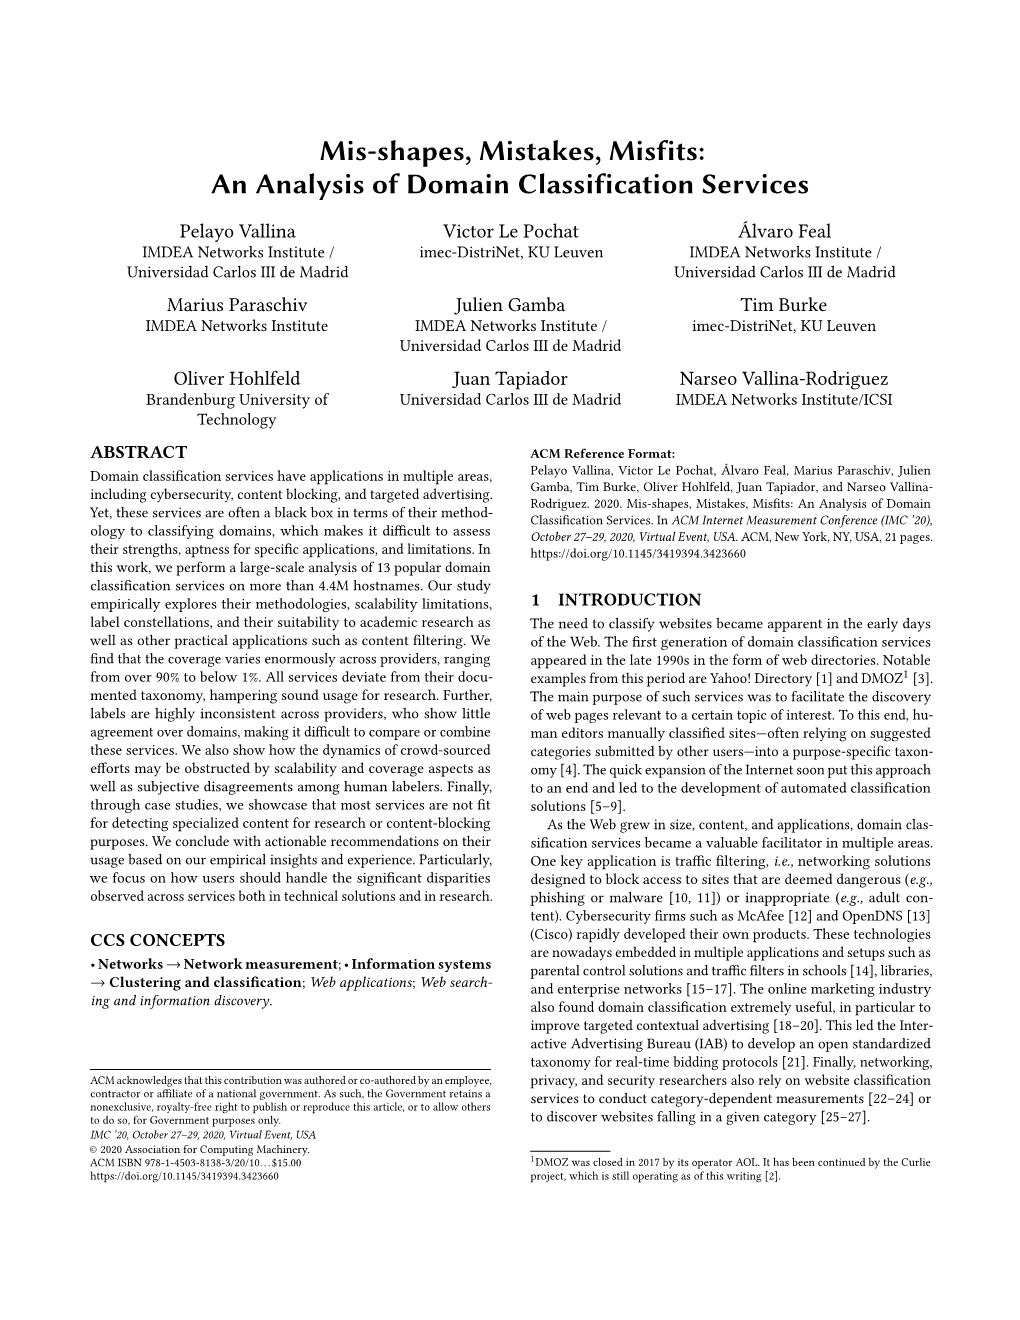 An Analysis of Domain Classification Services